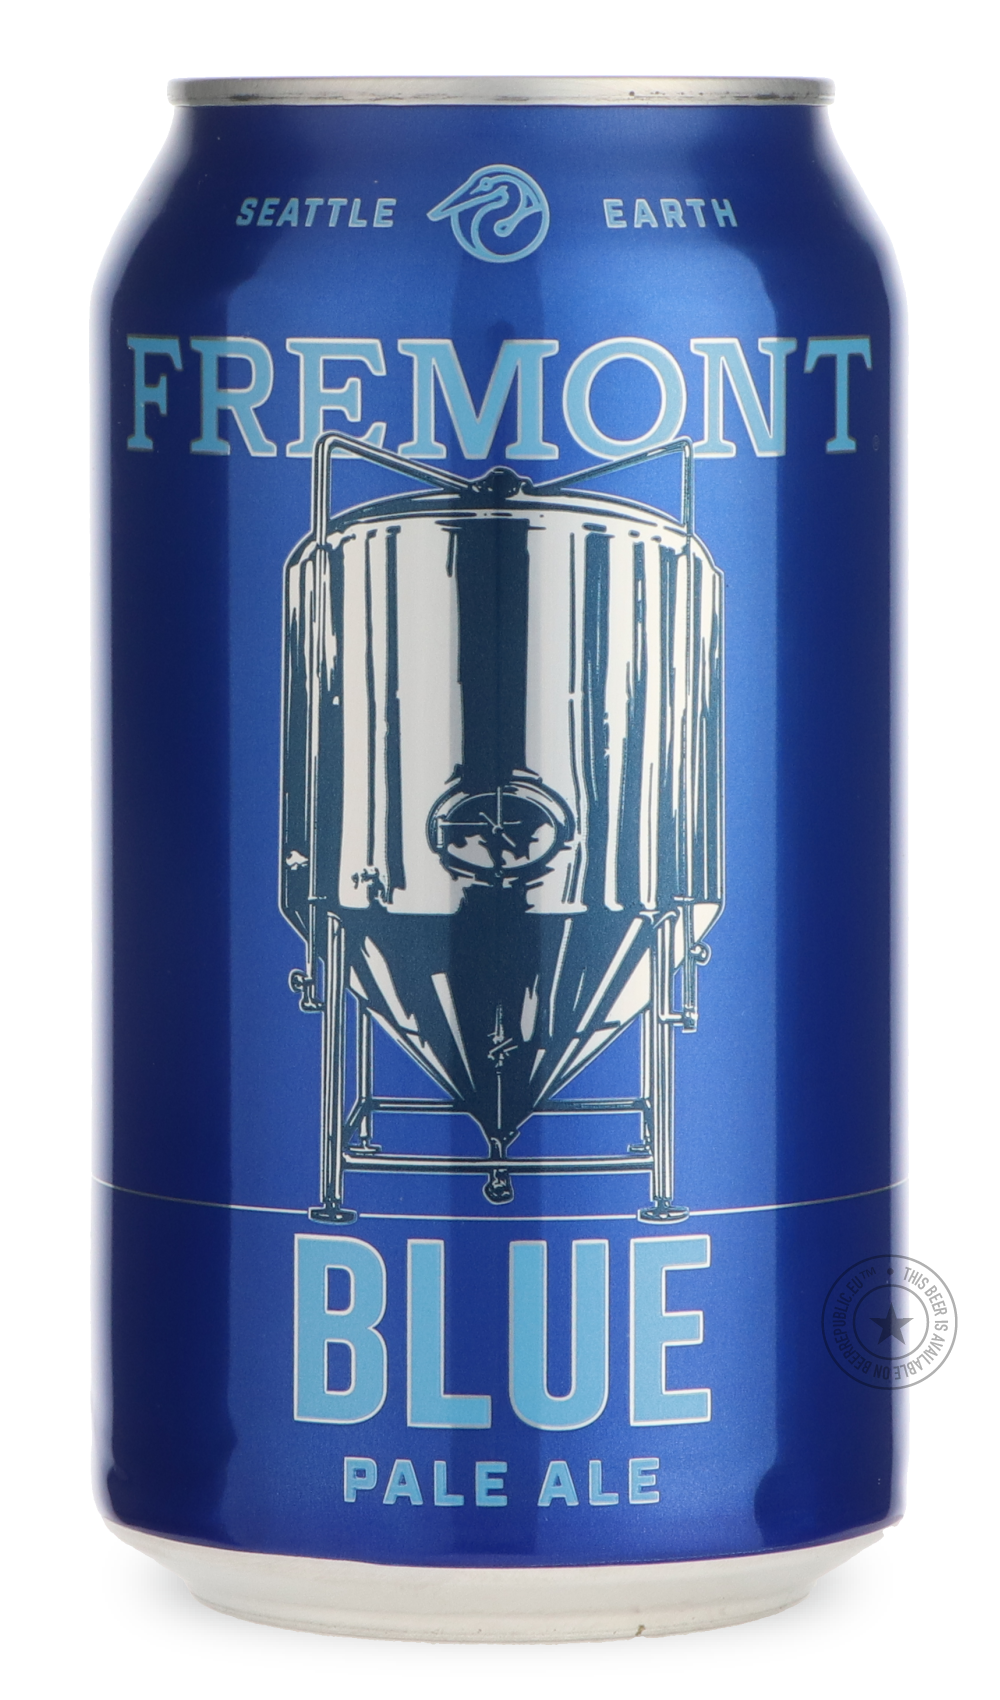 -Fremont- Blue-Pale- Only @ Beer Republic - The best online beer store for American & Canadian craft beer - Buy beer online from the USA and Canada - Bier online kopen - Amerikaans bier kopen - Craft beer store - Craft beer kopen - Amerikanisch bier kaufen - Bier online kaufen - Acheter biere online - IPA - Stout - Porter - New England IPA - Hazy IPA - Imperial Stout - Barrel Aged - Barrel Aged Imperial Stout - Brown - Dark beer - Blond - Blonde - Pilsner - Lager - Wheat - Weizen - Amber - Barley Wine - Qua